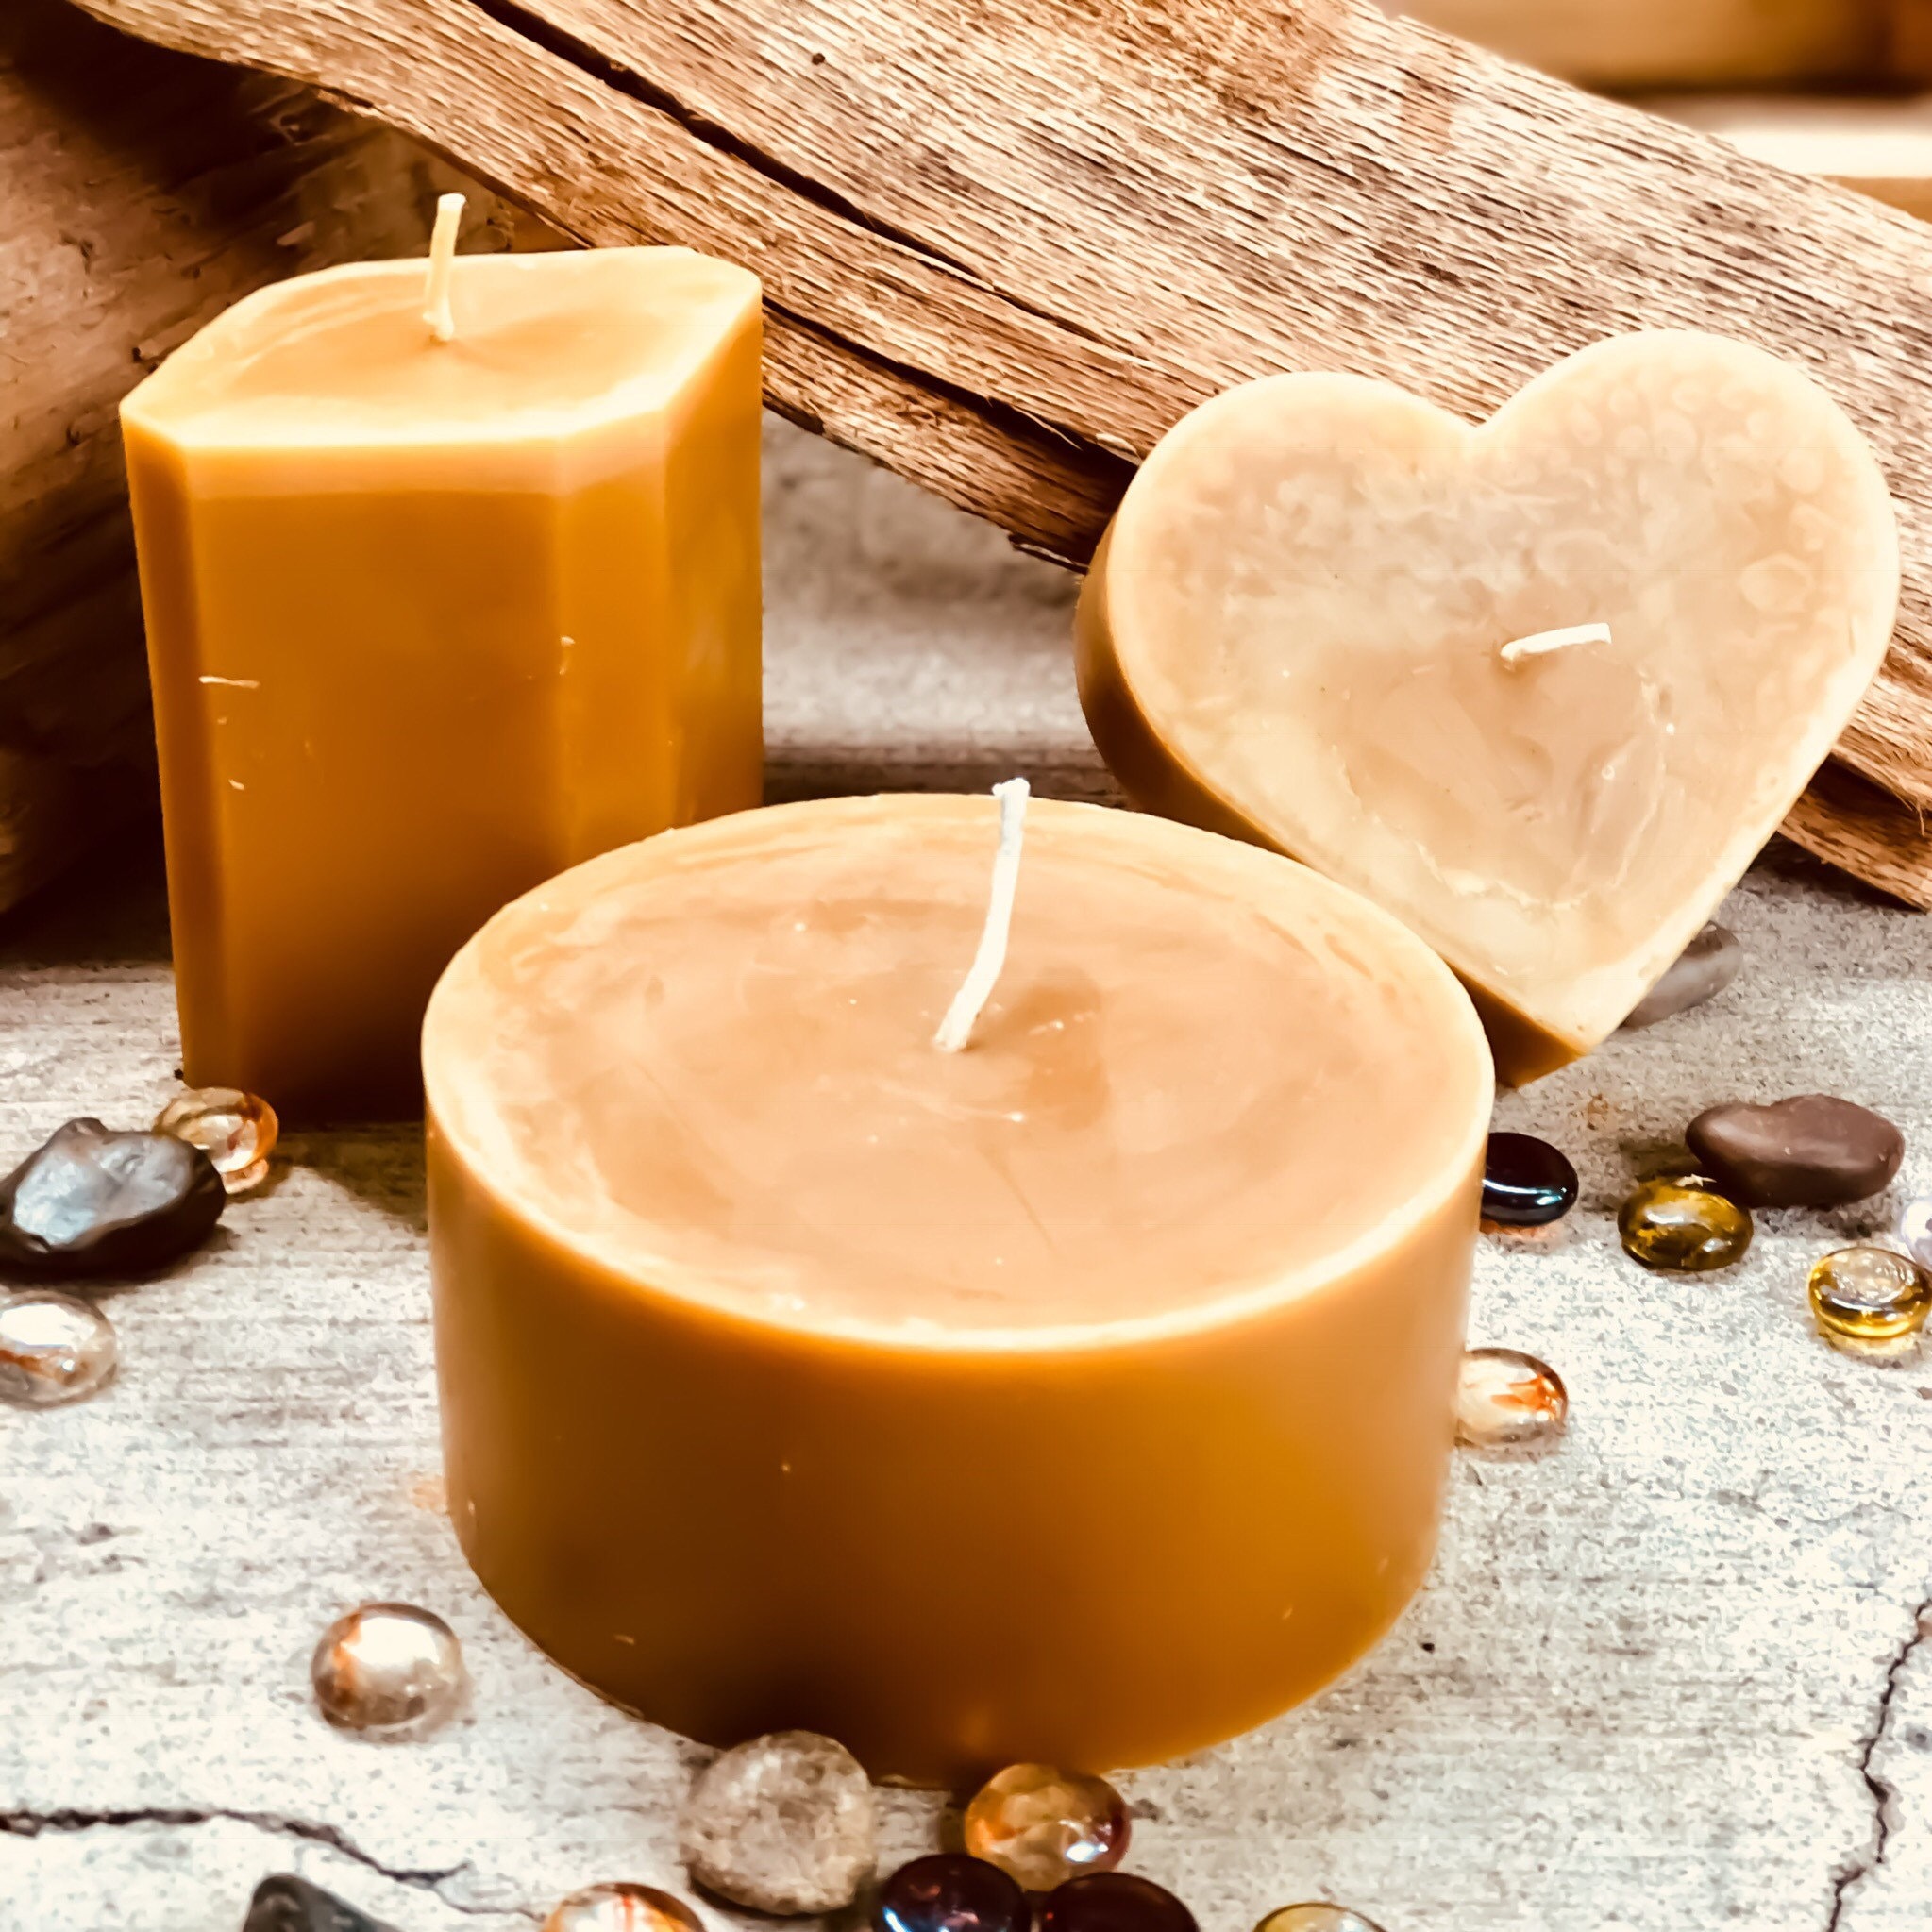 Extra Tall 100% Pure Beeswax Candle 2 Wide and up to 15inches Tall-super  Elegant and Drip and Toxin Free-pure Beeswax Pillars 